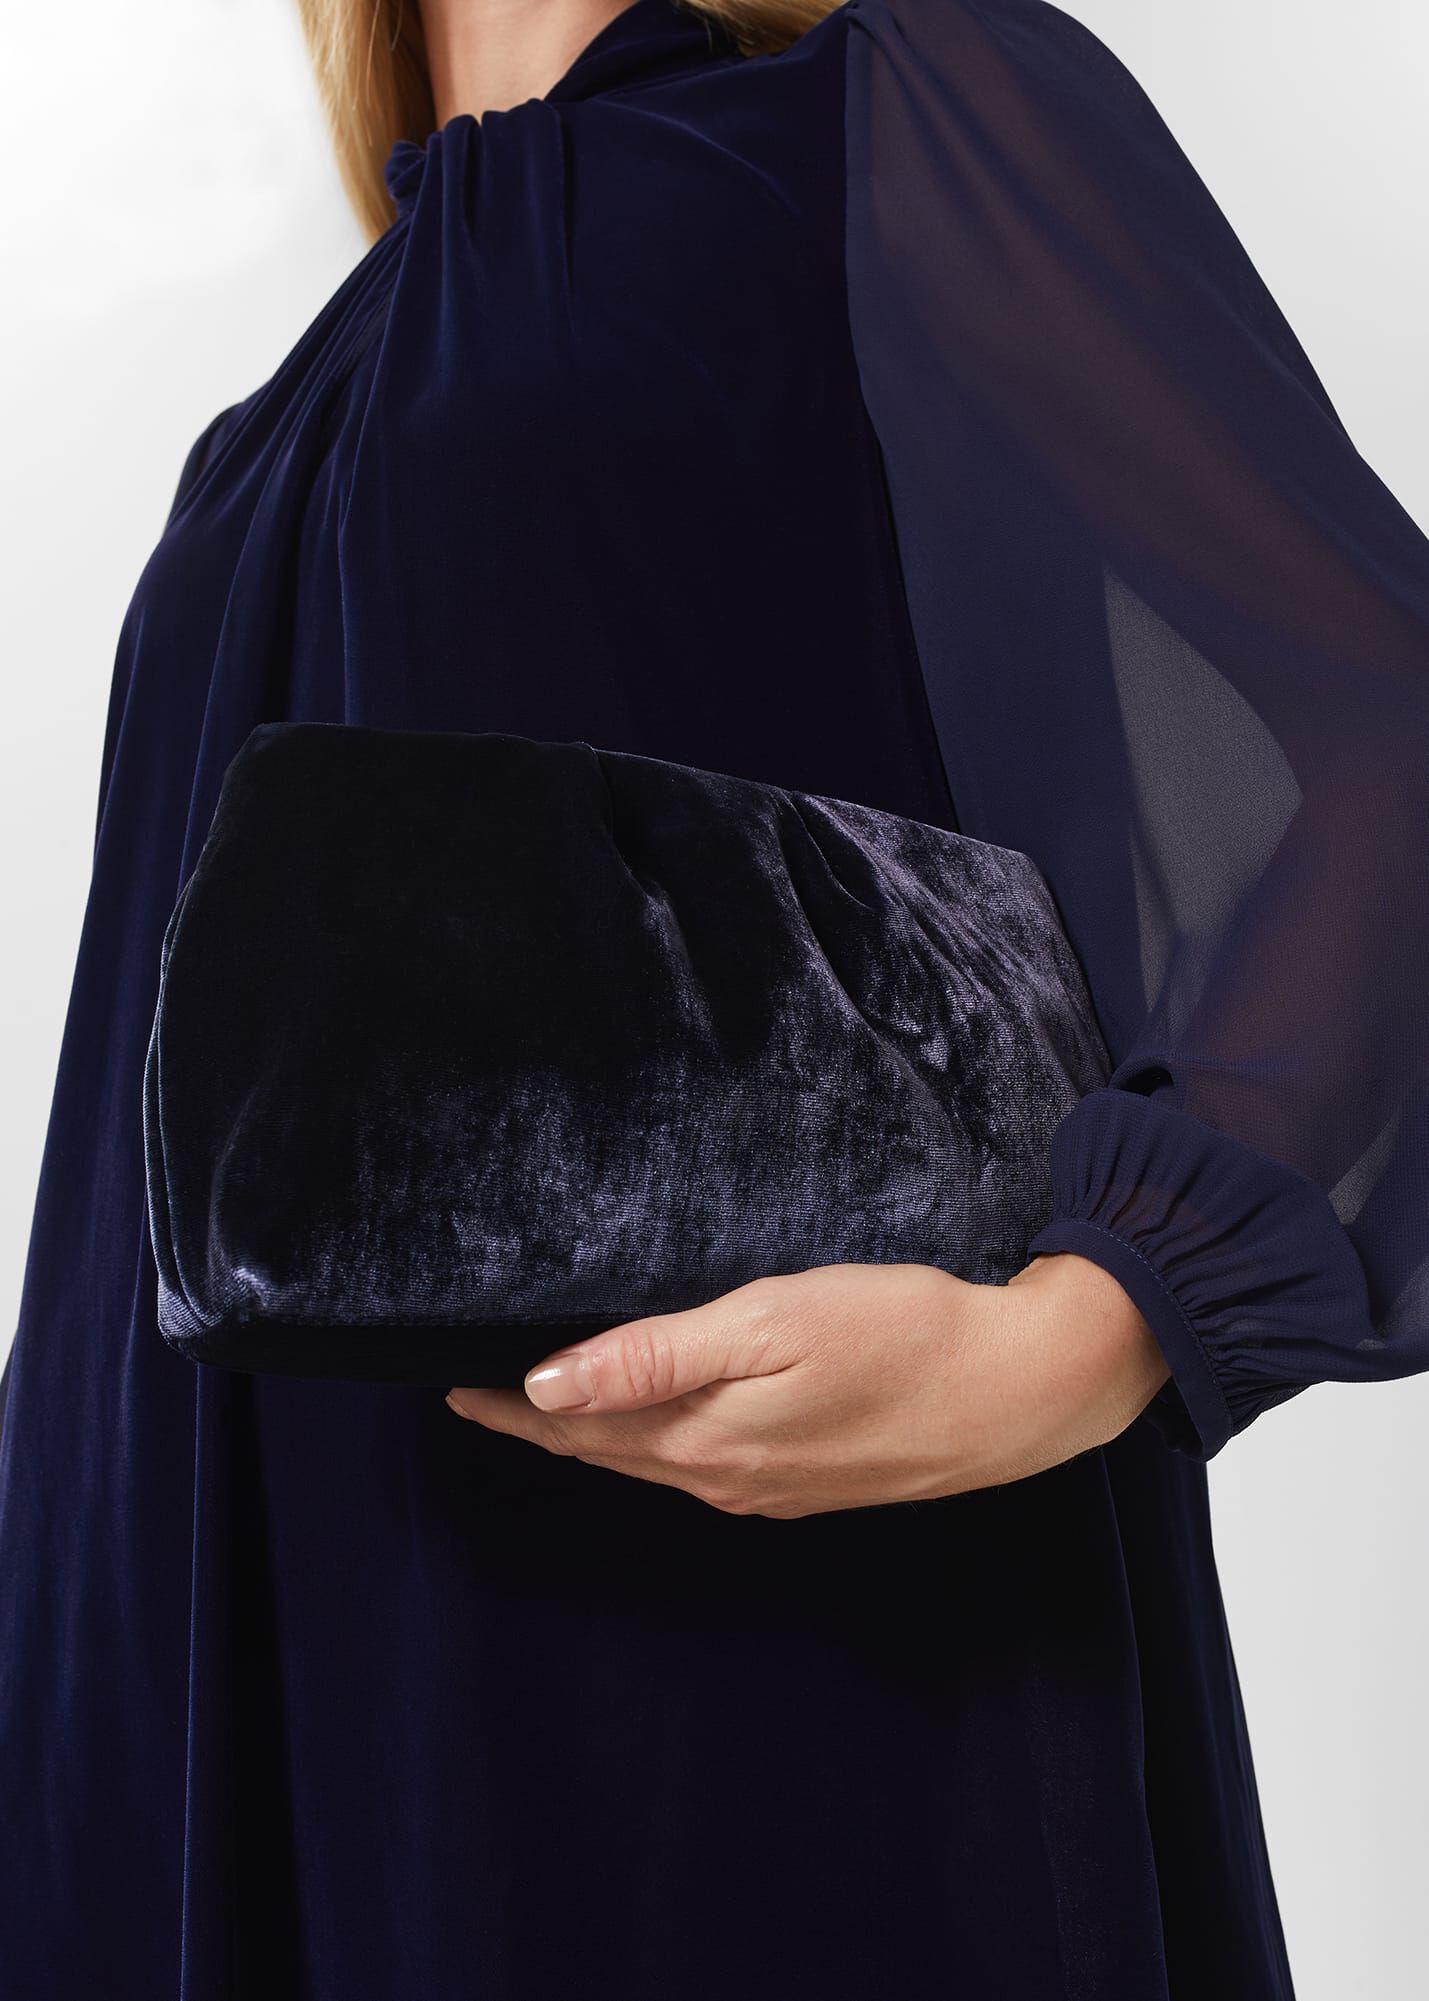 Embroidered Black Velvet Clutch Bag with Rubies – BoutiqueByMariam